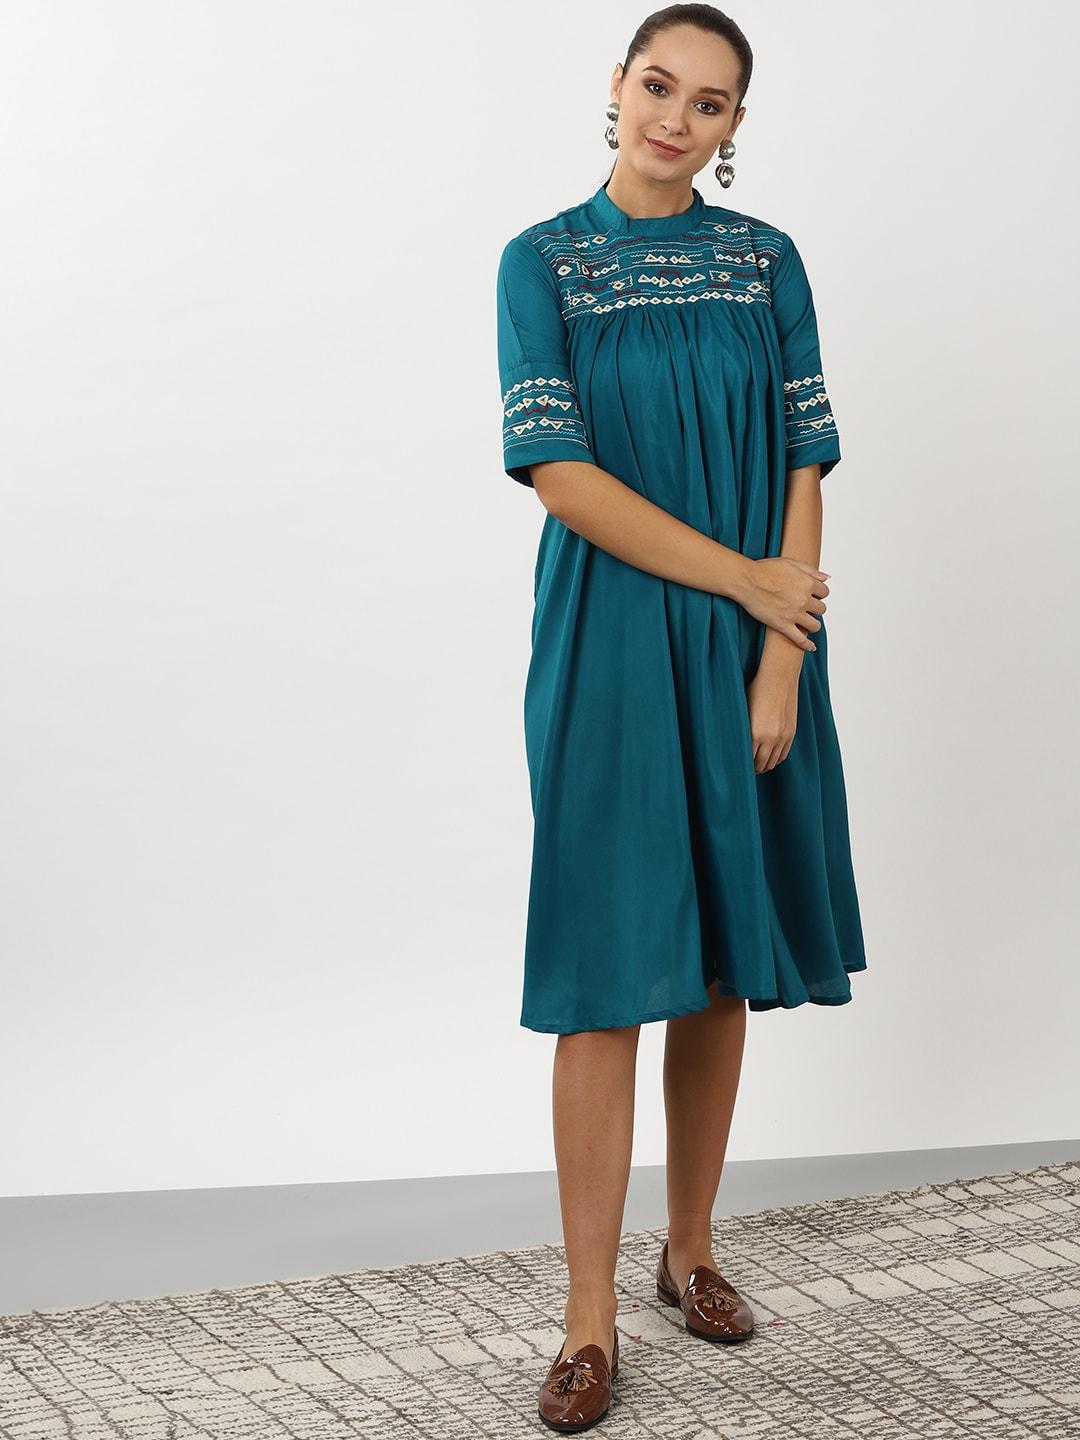 sangria teal blue ethnic motifs embroidered ethnic empire midi dress